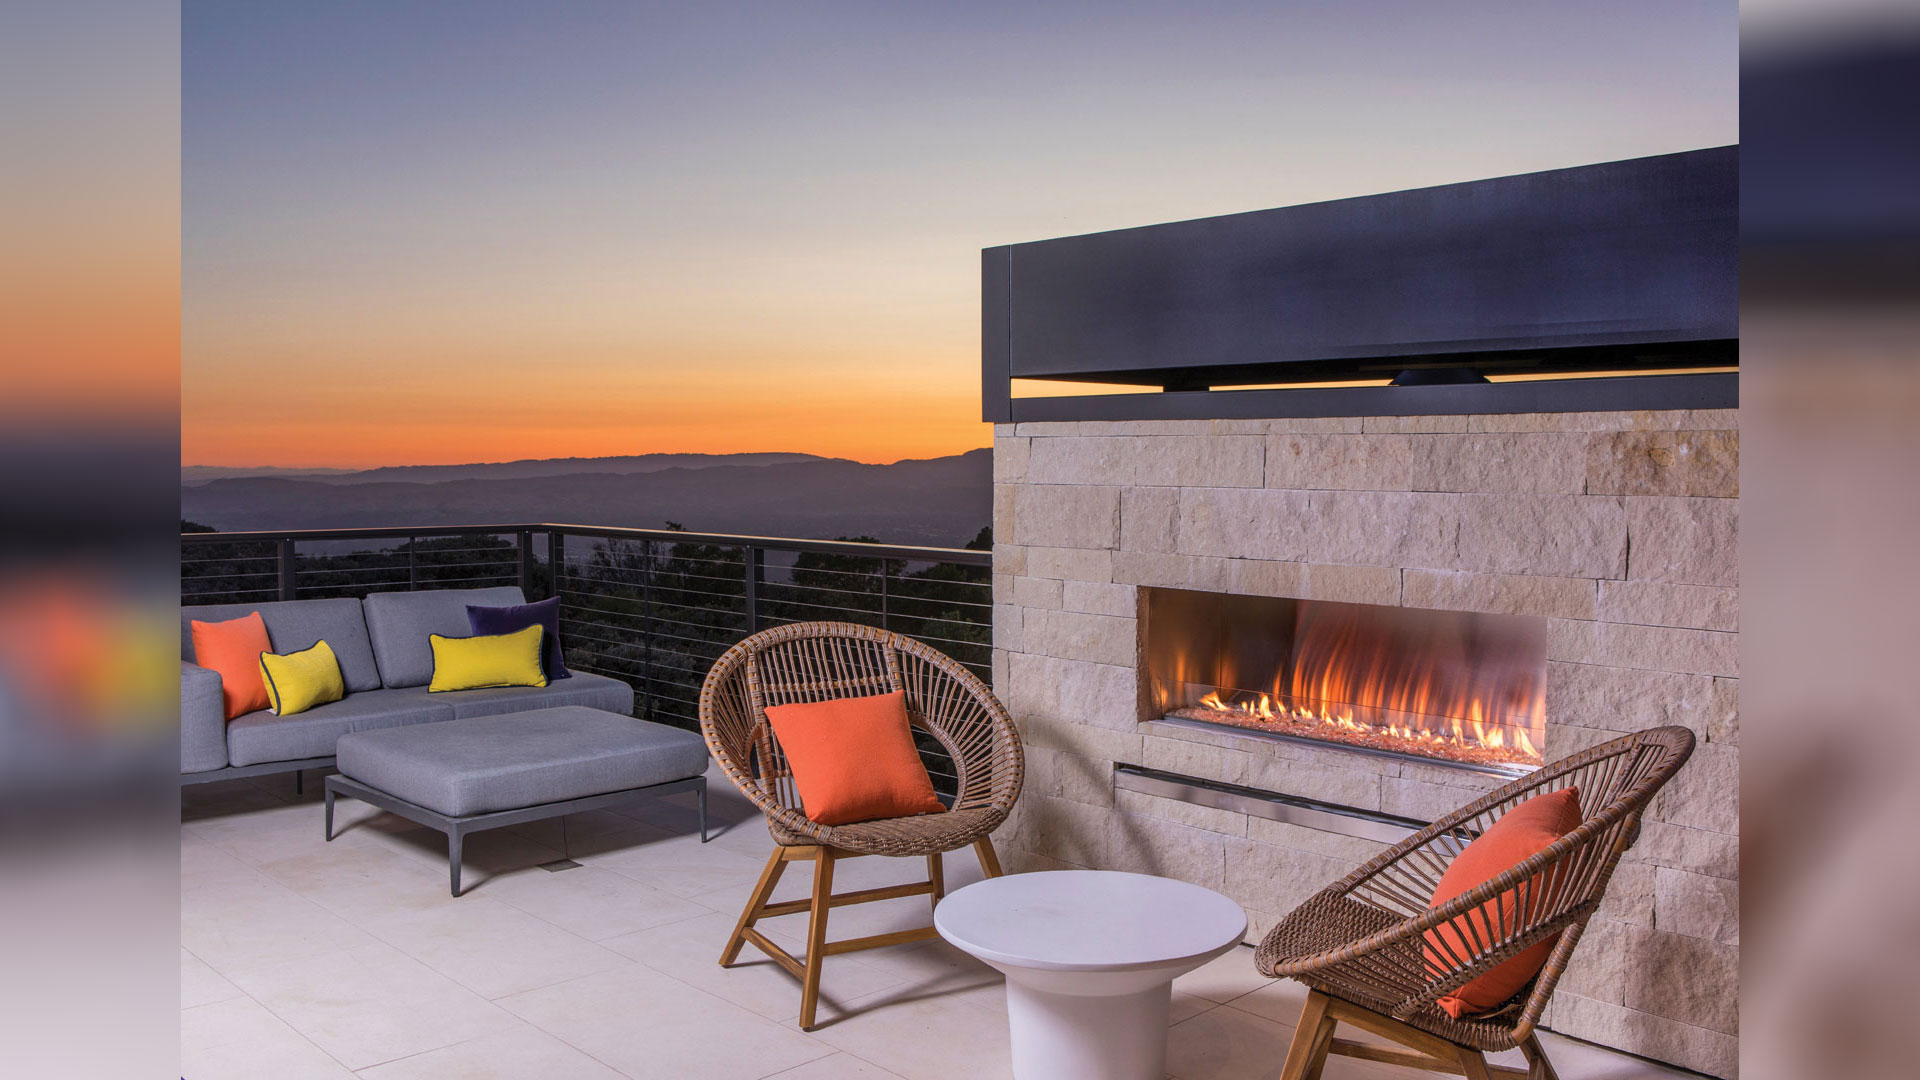 Outdoor fireplace with Nadia Neo Ledge: Sawn wall